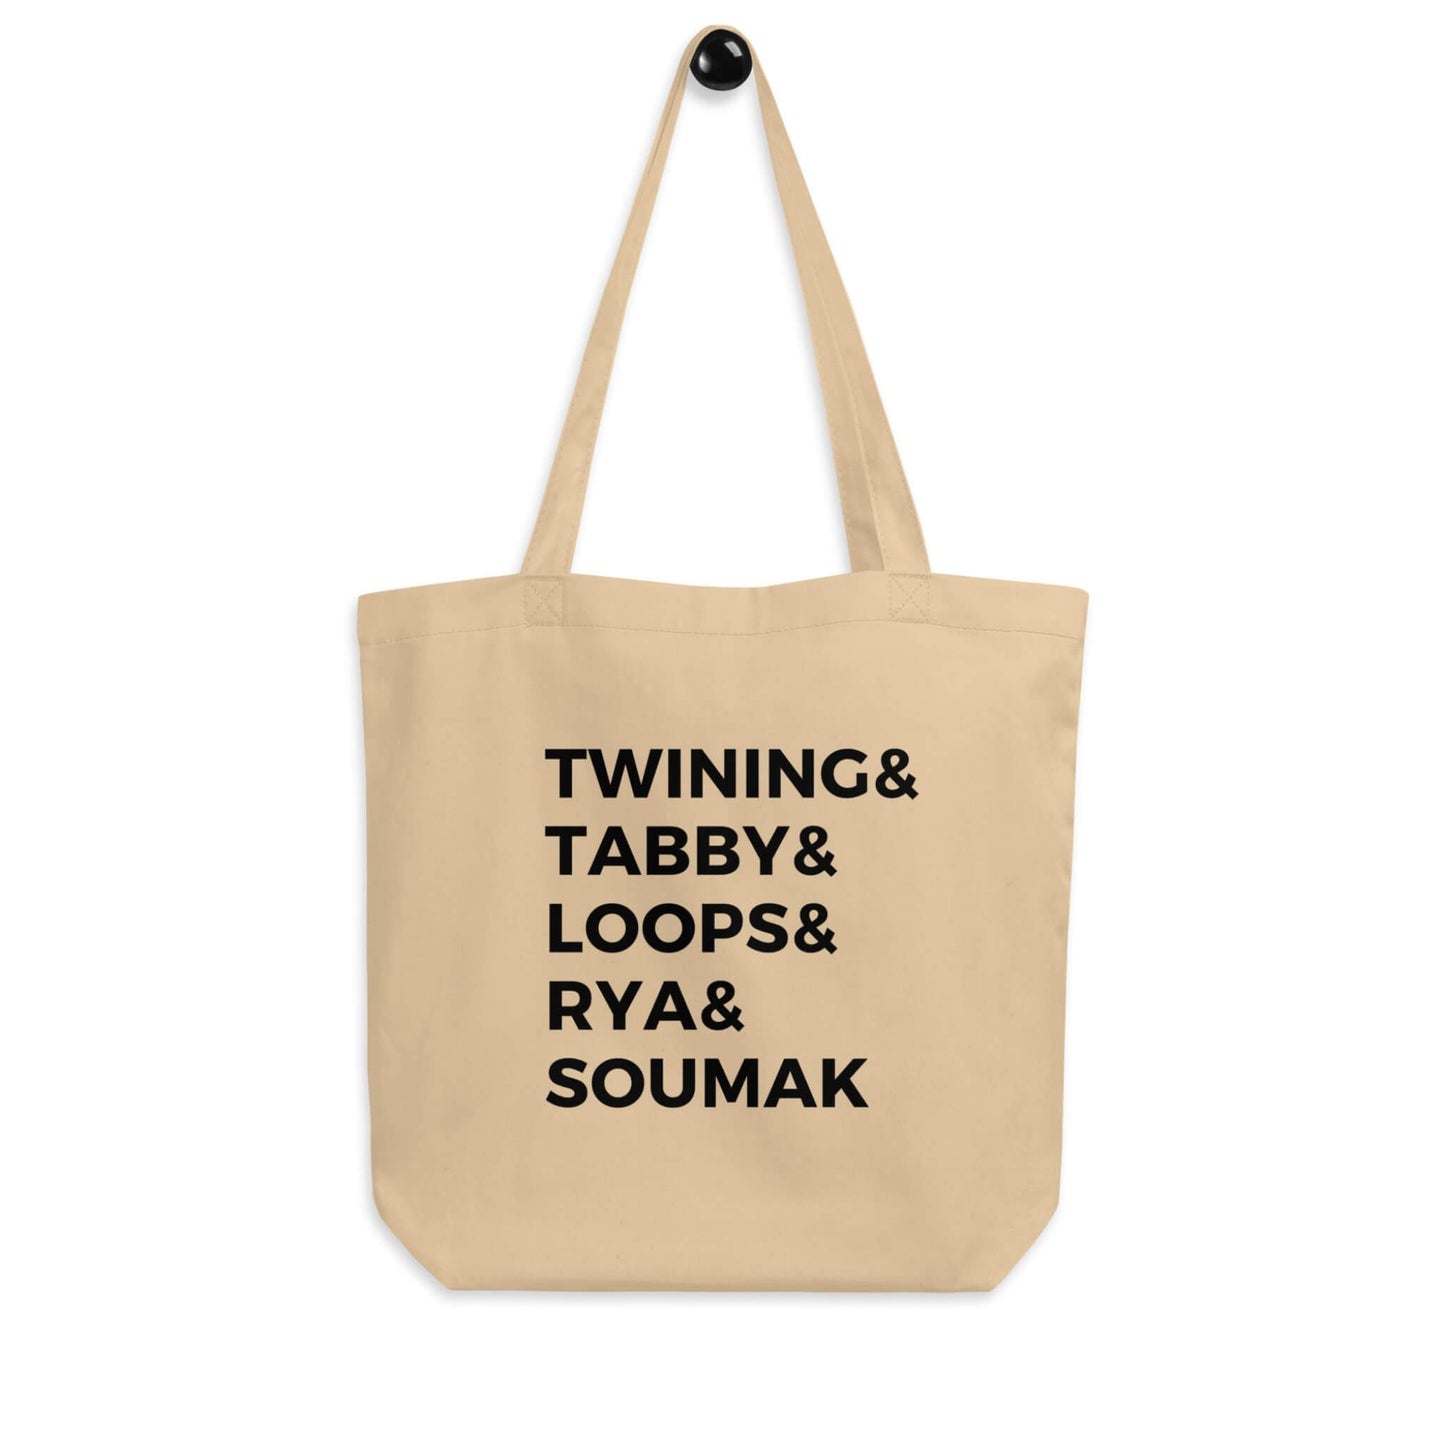 weaving stitches tote bag - wear and woven